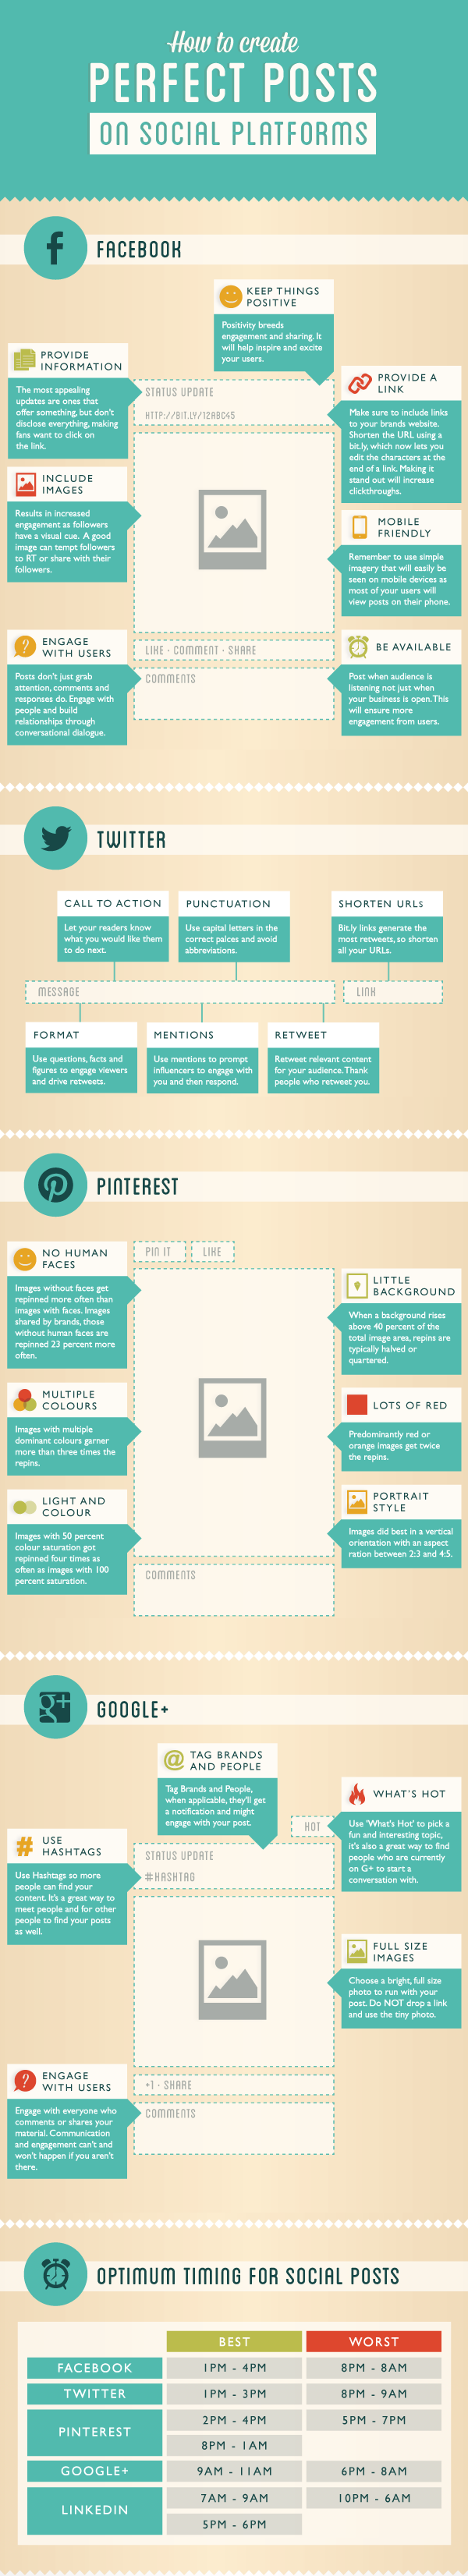 Picture perfect social media posts